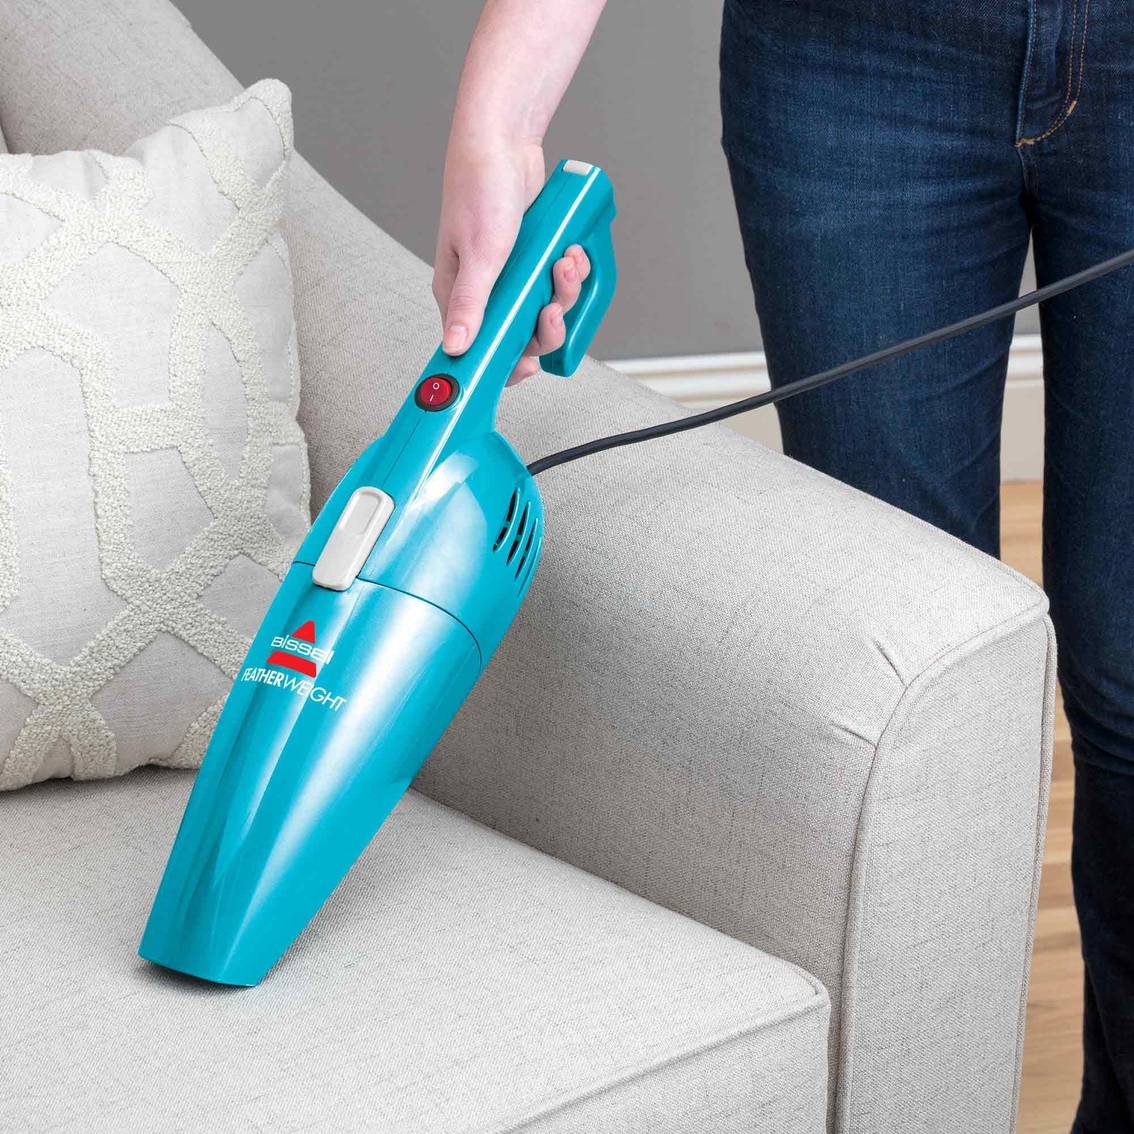 Bissell FeatherWeight Stick Vacuum - Image 4 of 4